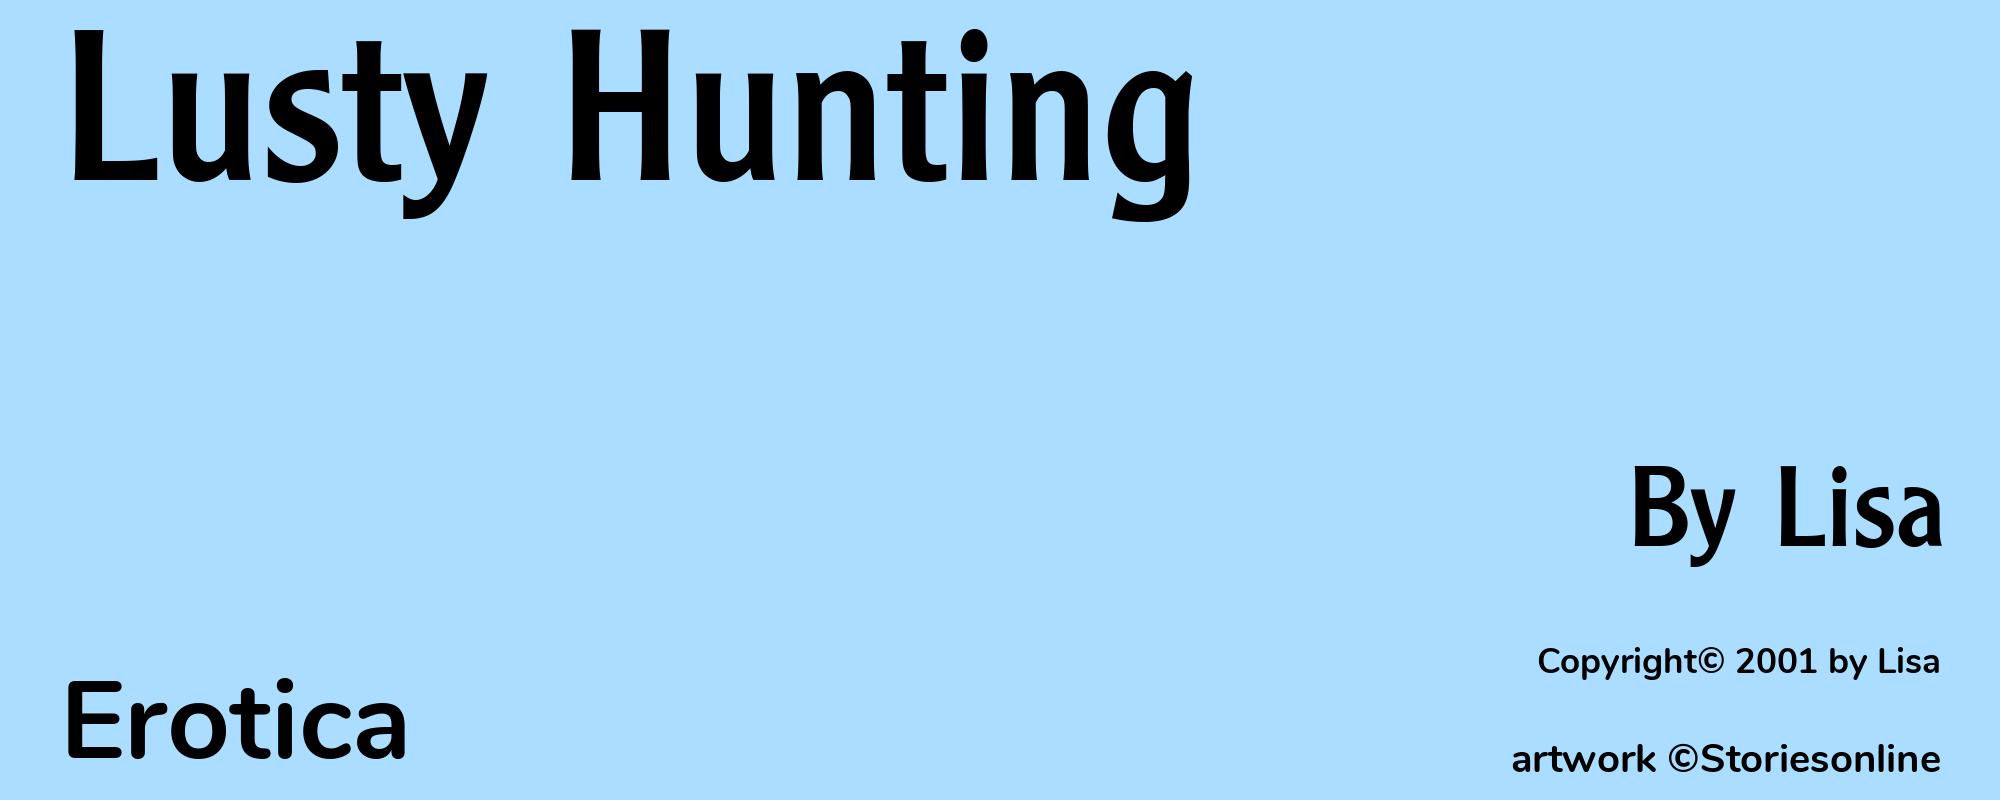 Lusty Hunting - Cover